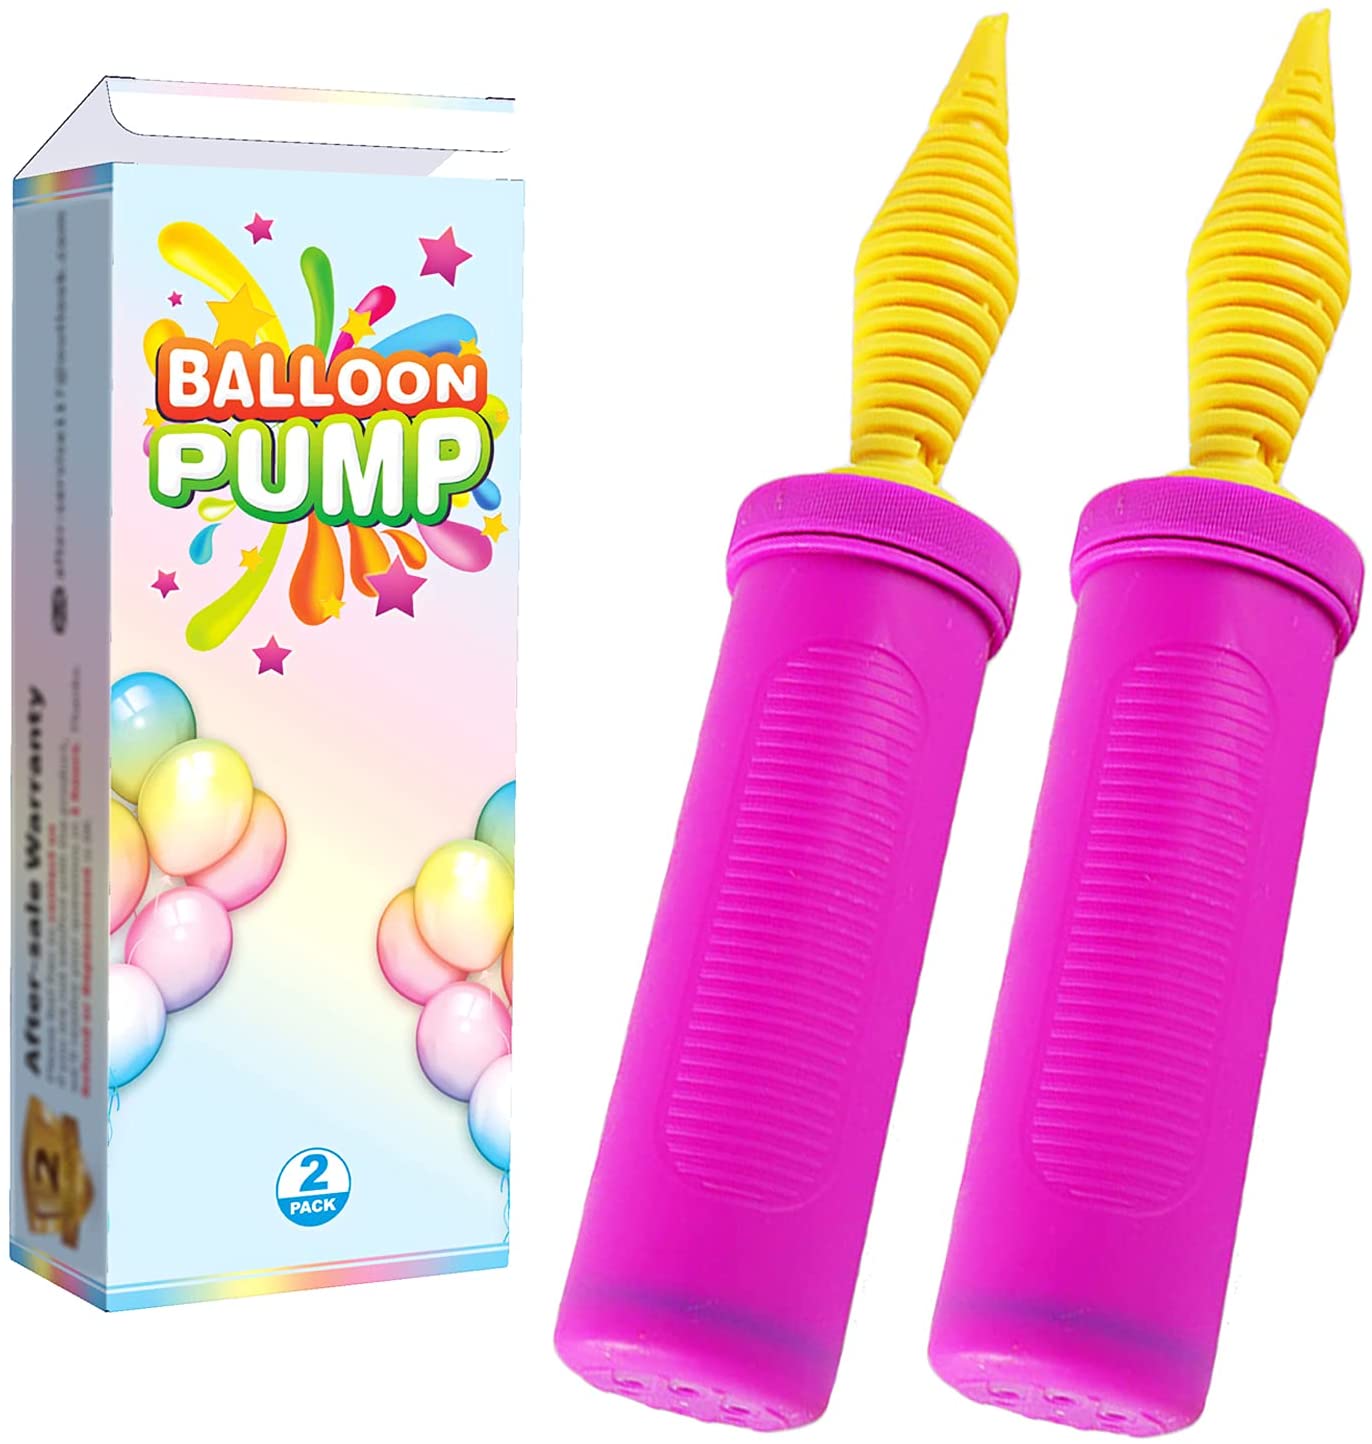 (2 Pack) Balloon Pumps for Party Balloons Birthday Foil Balloons Modelling Balloon, Lightweight Durable Hand Manual Inflator